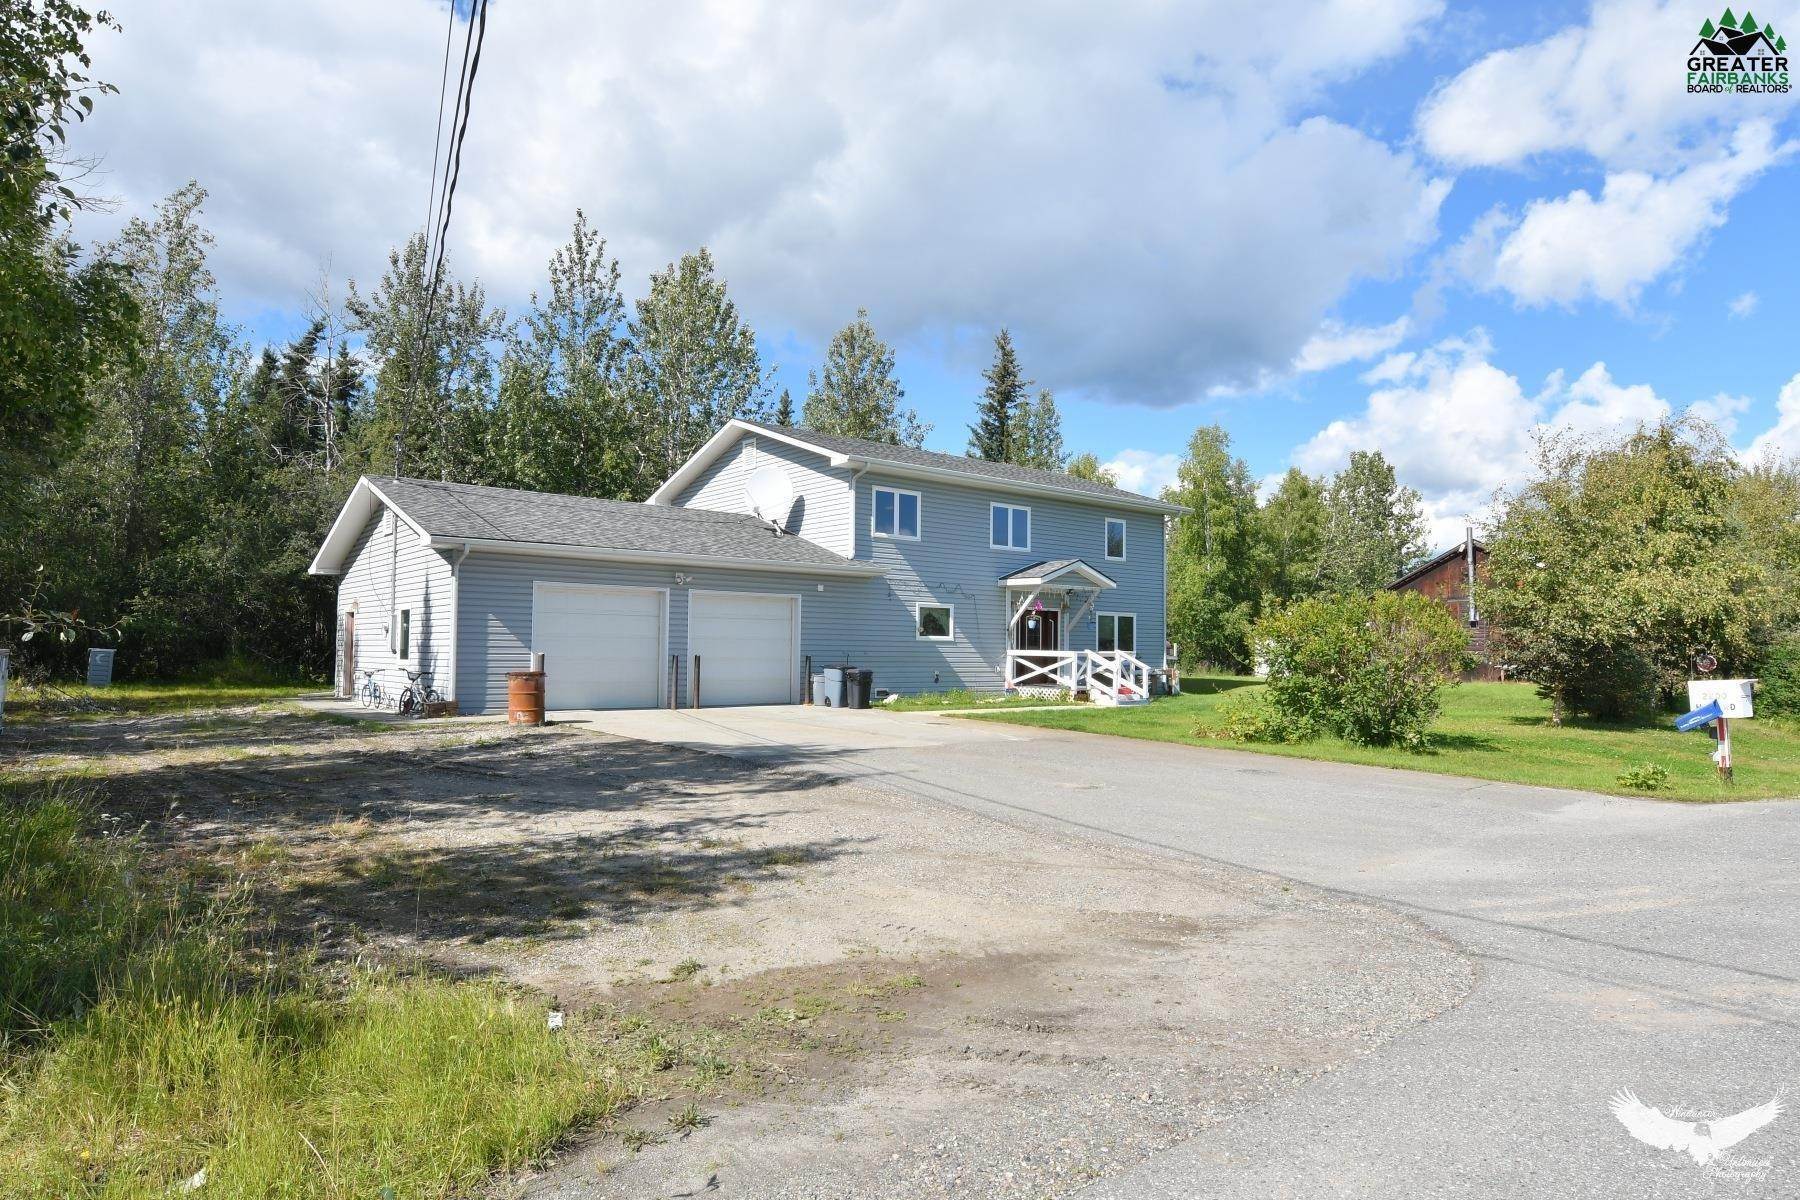 2. Single Family Homes for Sale at 2200 HILL ROAD Fairbanks, Alaska 99709 United States